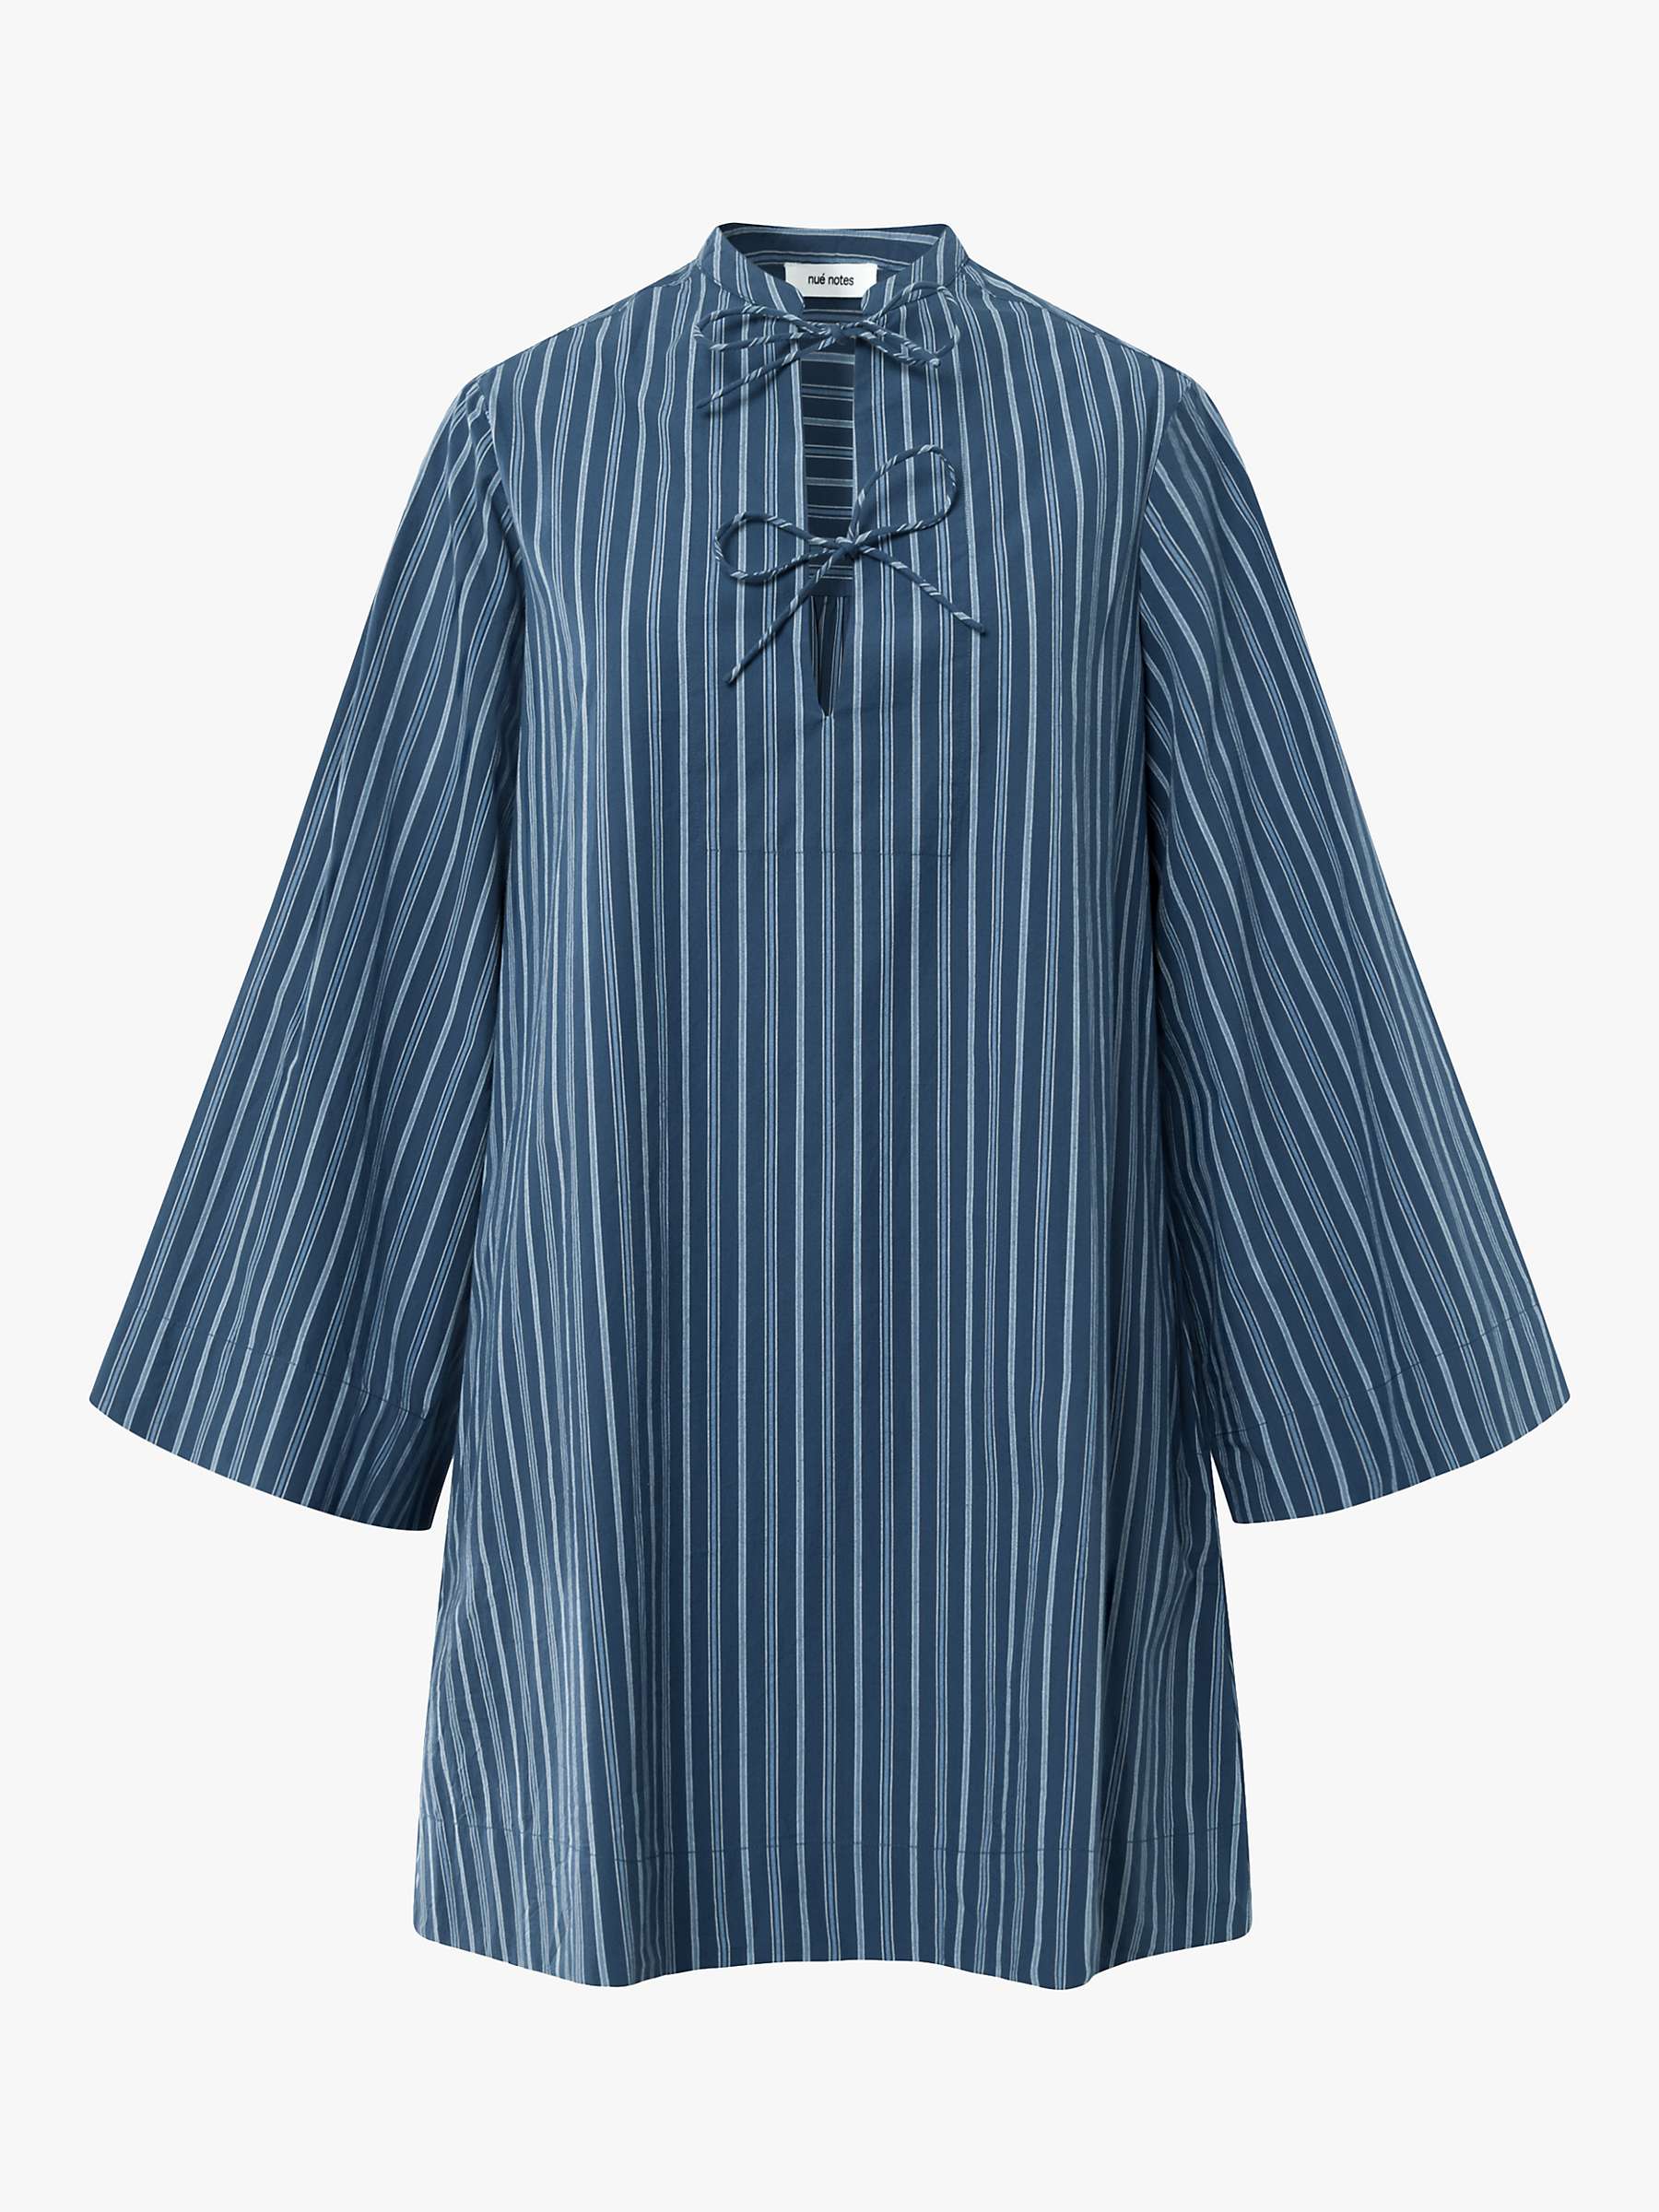 Buy nué notes Beau Collared Mini Dress, True Navy Online at johnlewis.com